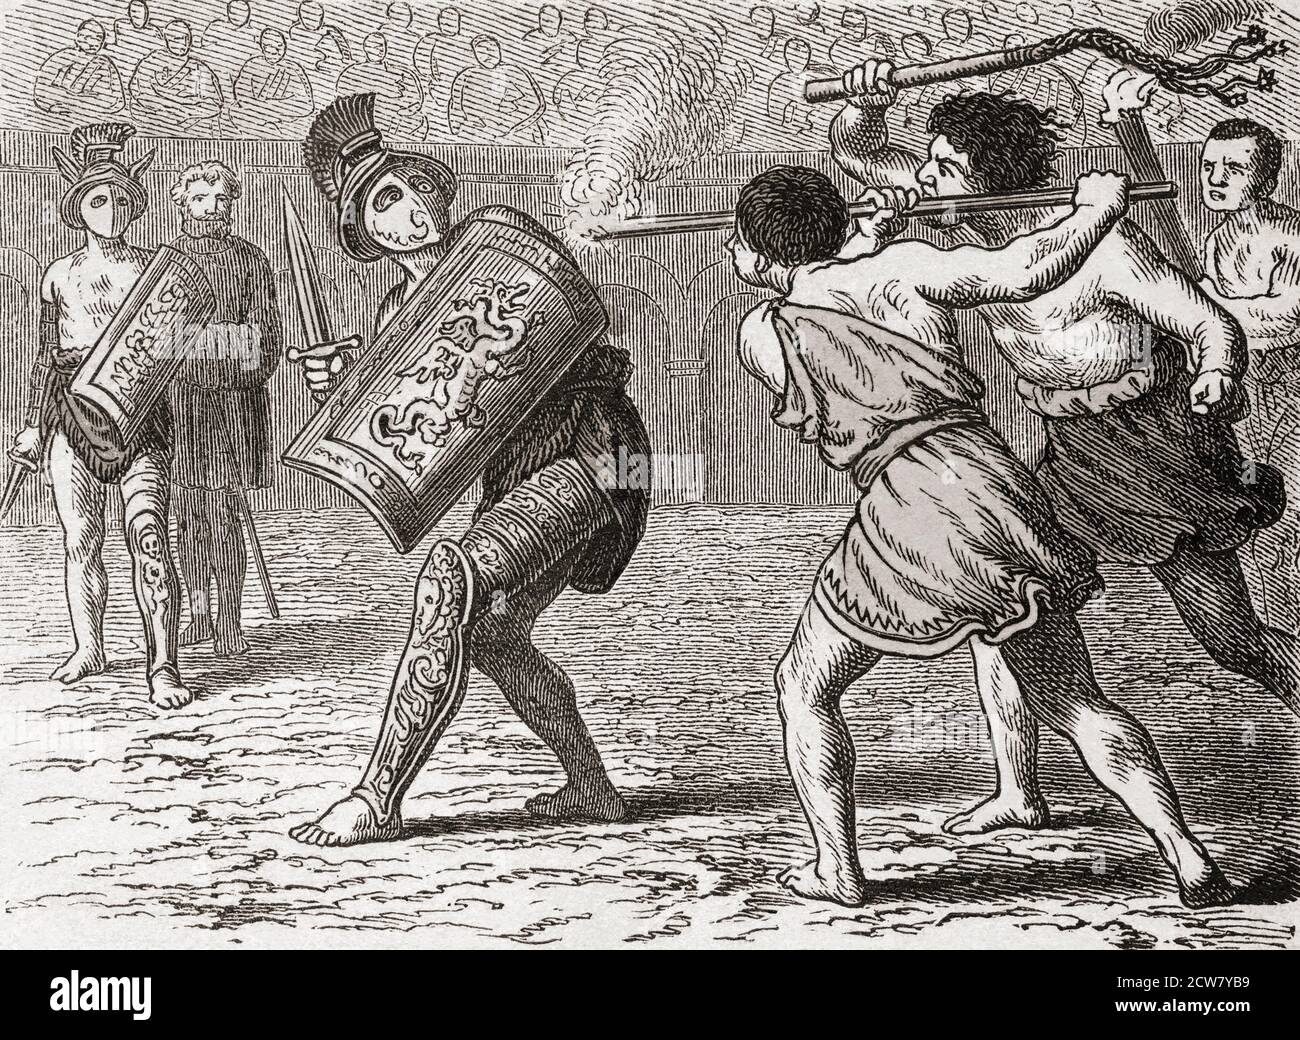 Gladiator goaded by whips to join combat.  After a mid-19th century illustration by an unidentified artist. Stock Photo